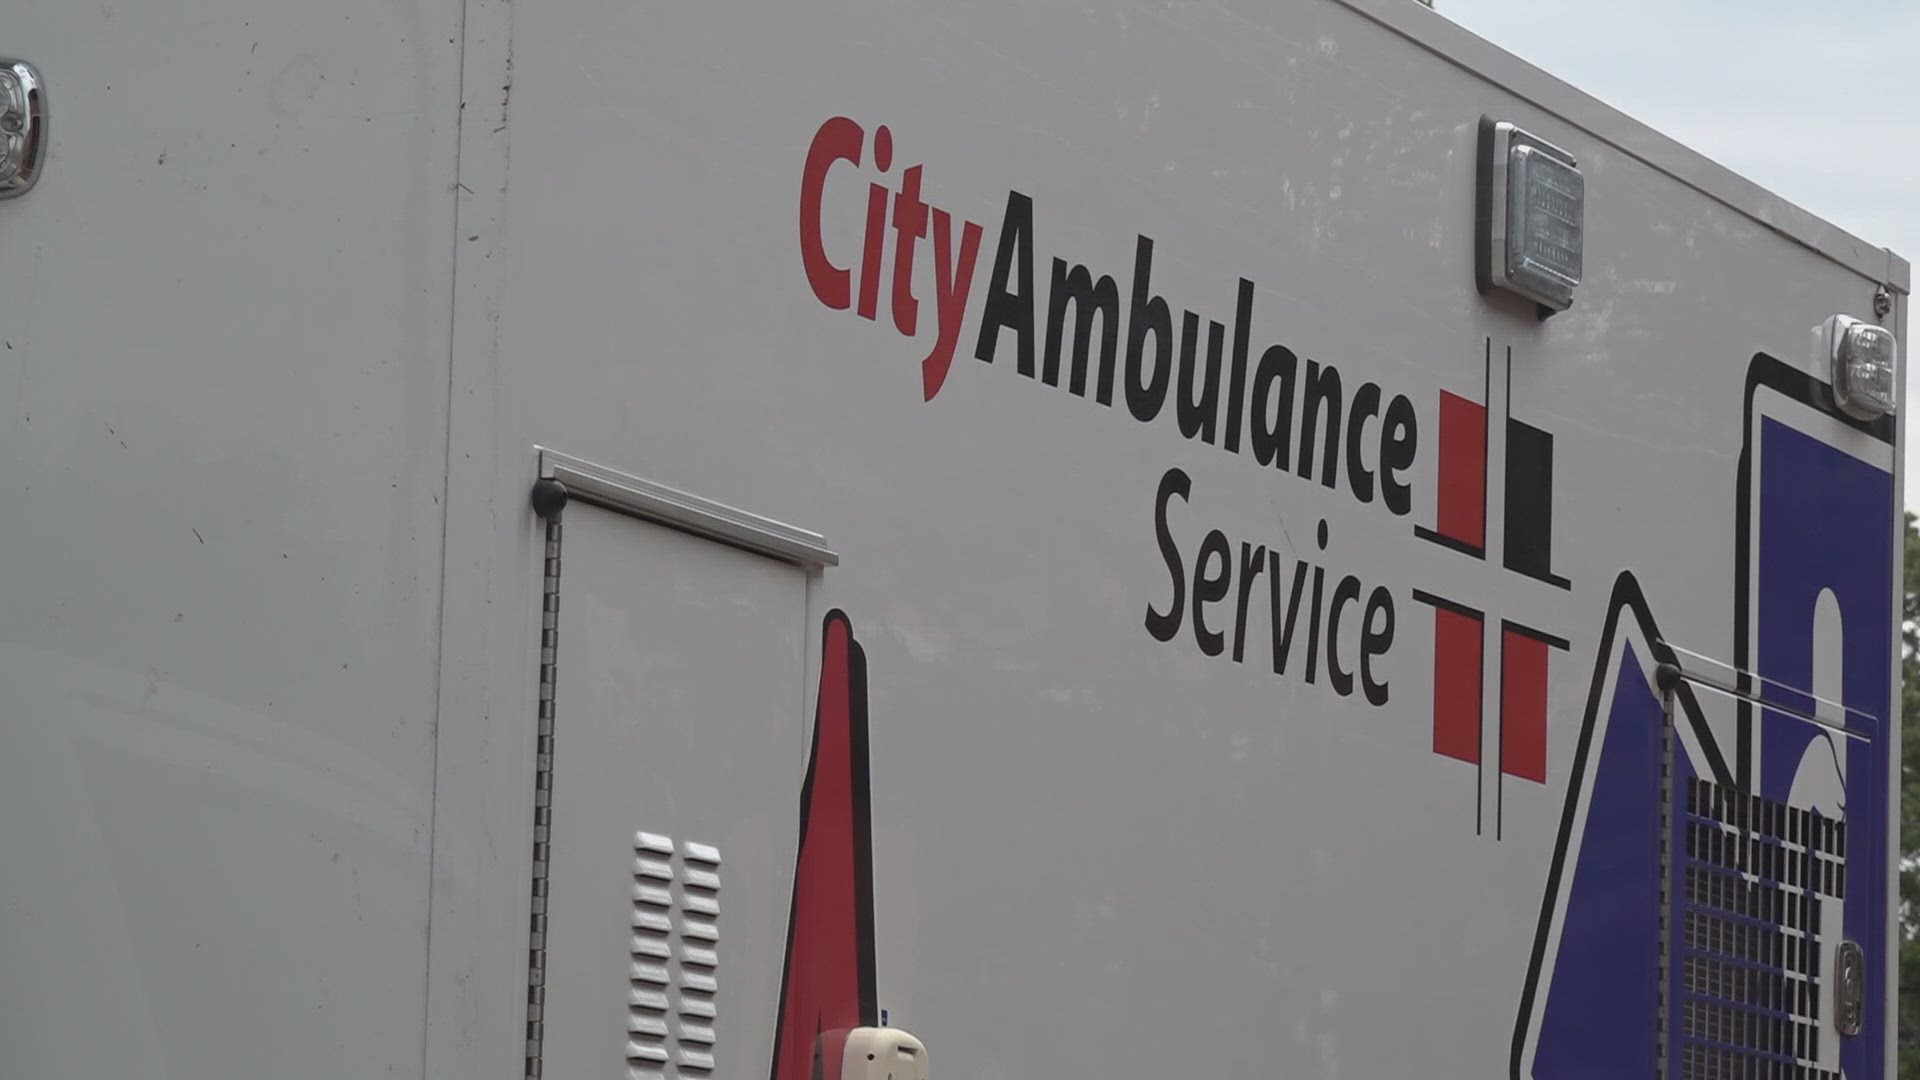 The City of Nolanville is looking elsewhere for ambulance services after it's previous contract went up 1200%